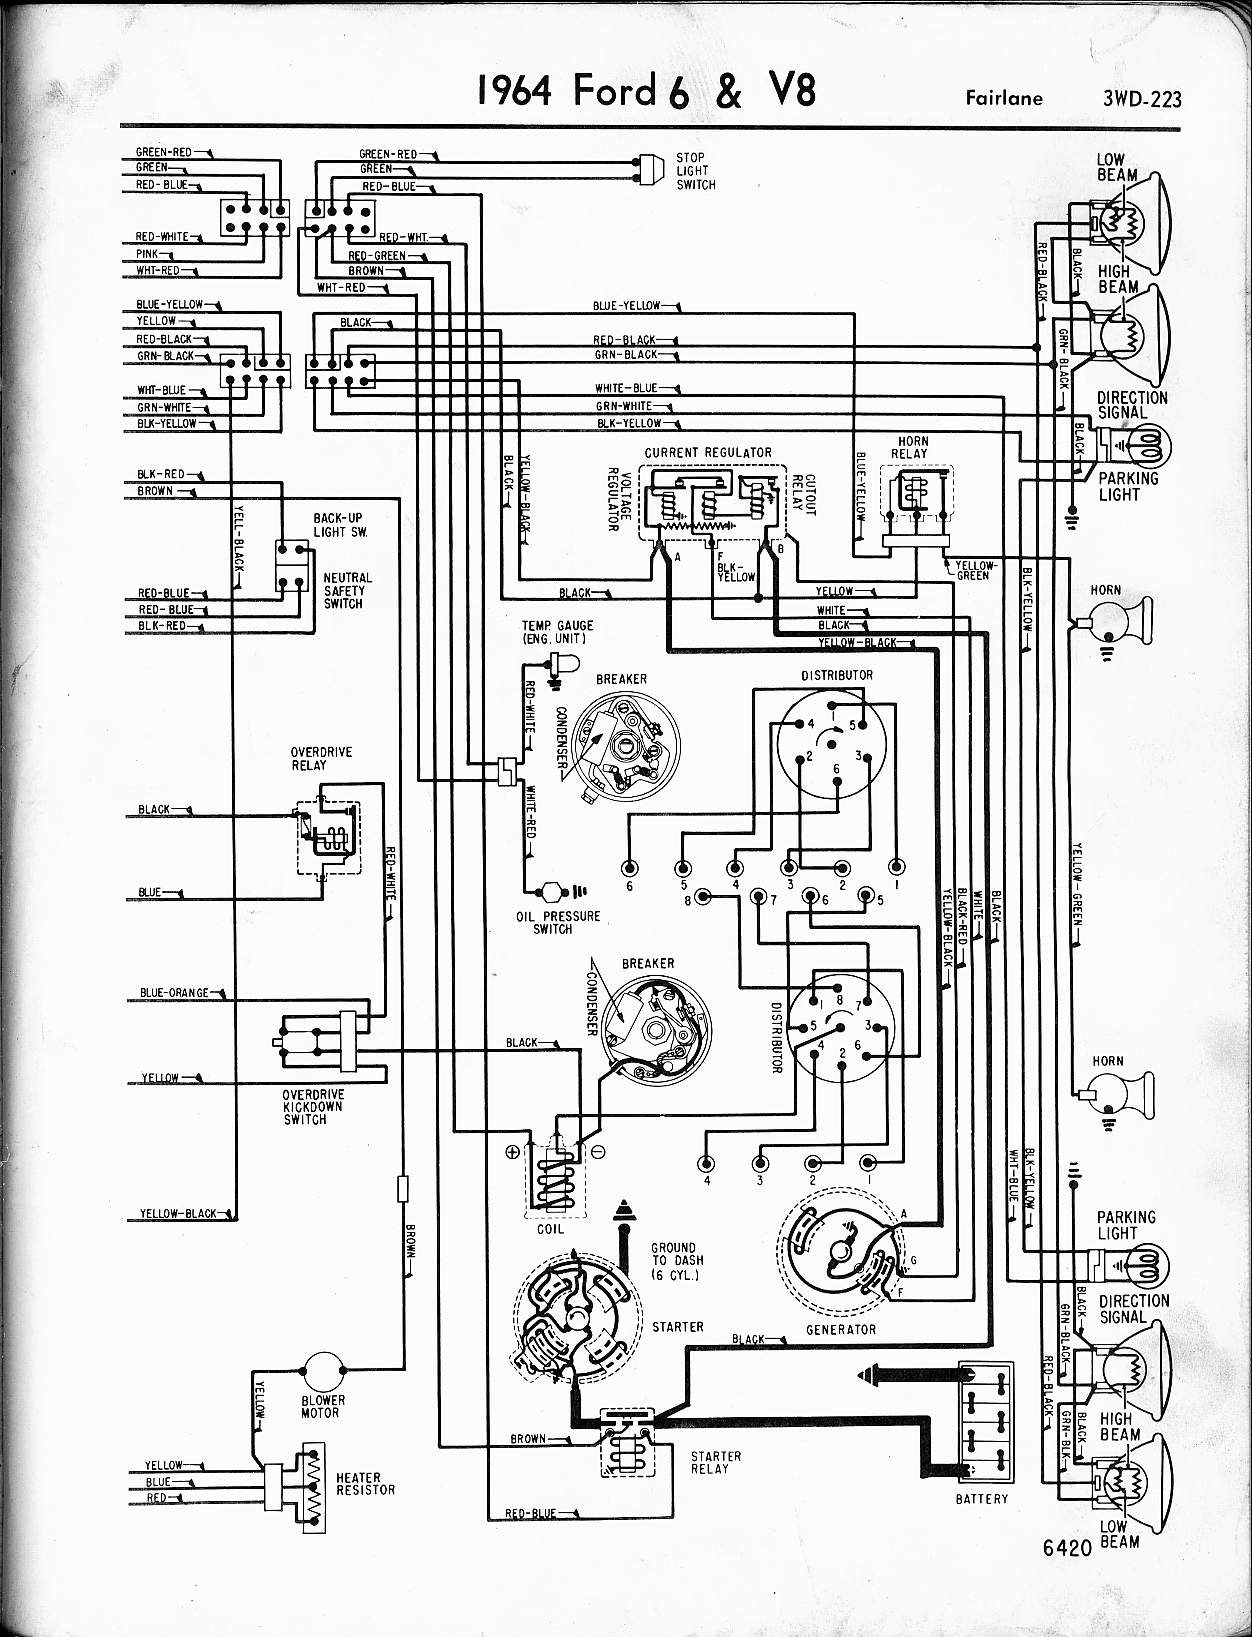 1955 Ford Fairlane Wiring Diagram from www.oldcarmanualproject.com